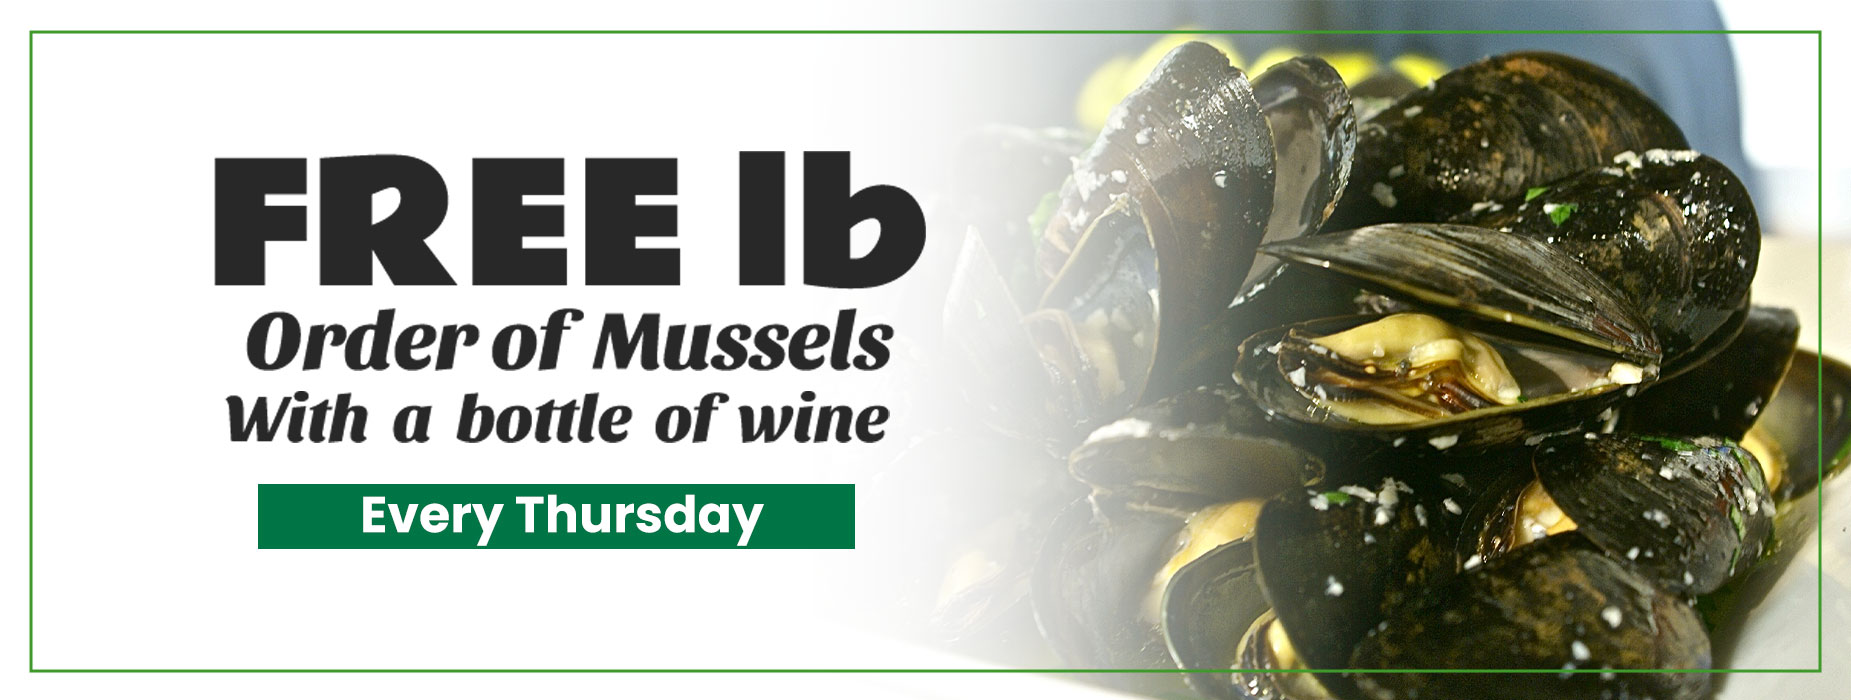 Free lb Order of Mussels with a Bottle of Wine - Every Thursday